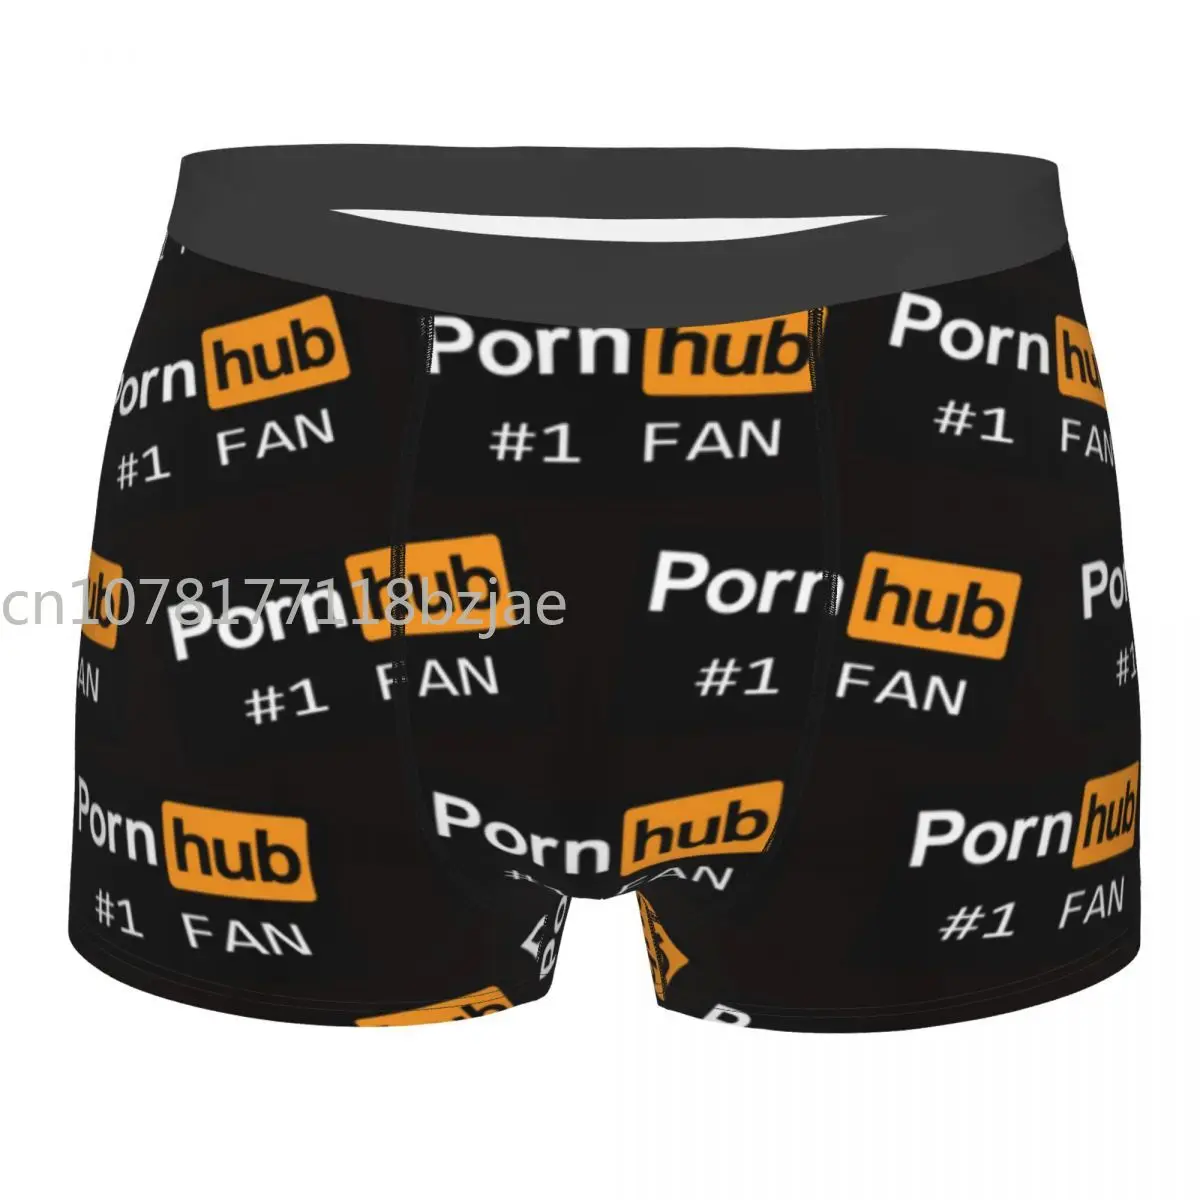 

All Season Pornhub Merchandise Man's Boxer Briefs Highly Breathable Underpants Top Quality Print Shorts Birthday Gifts